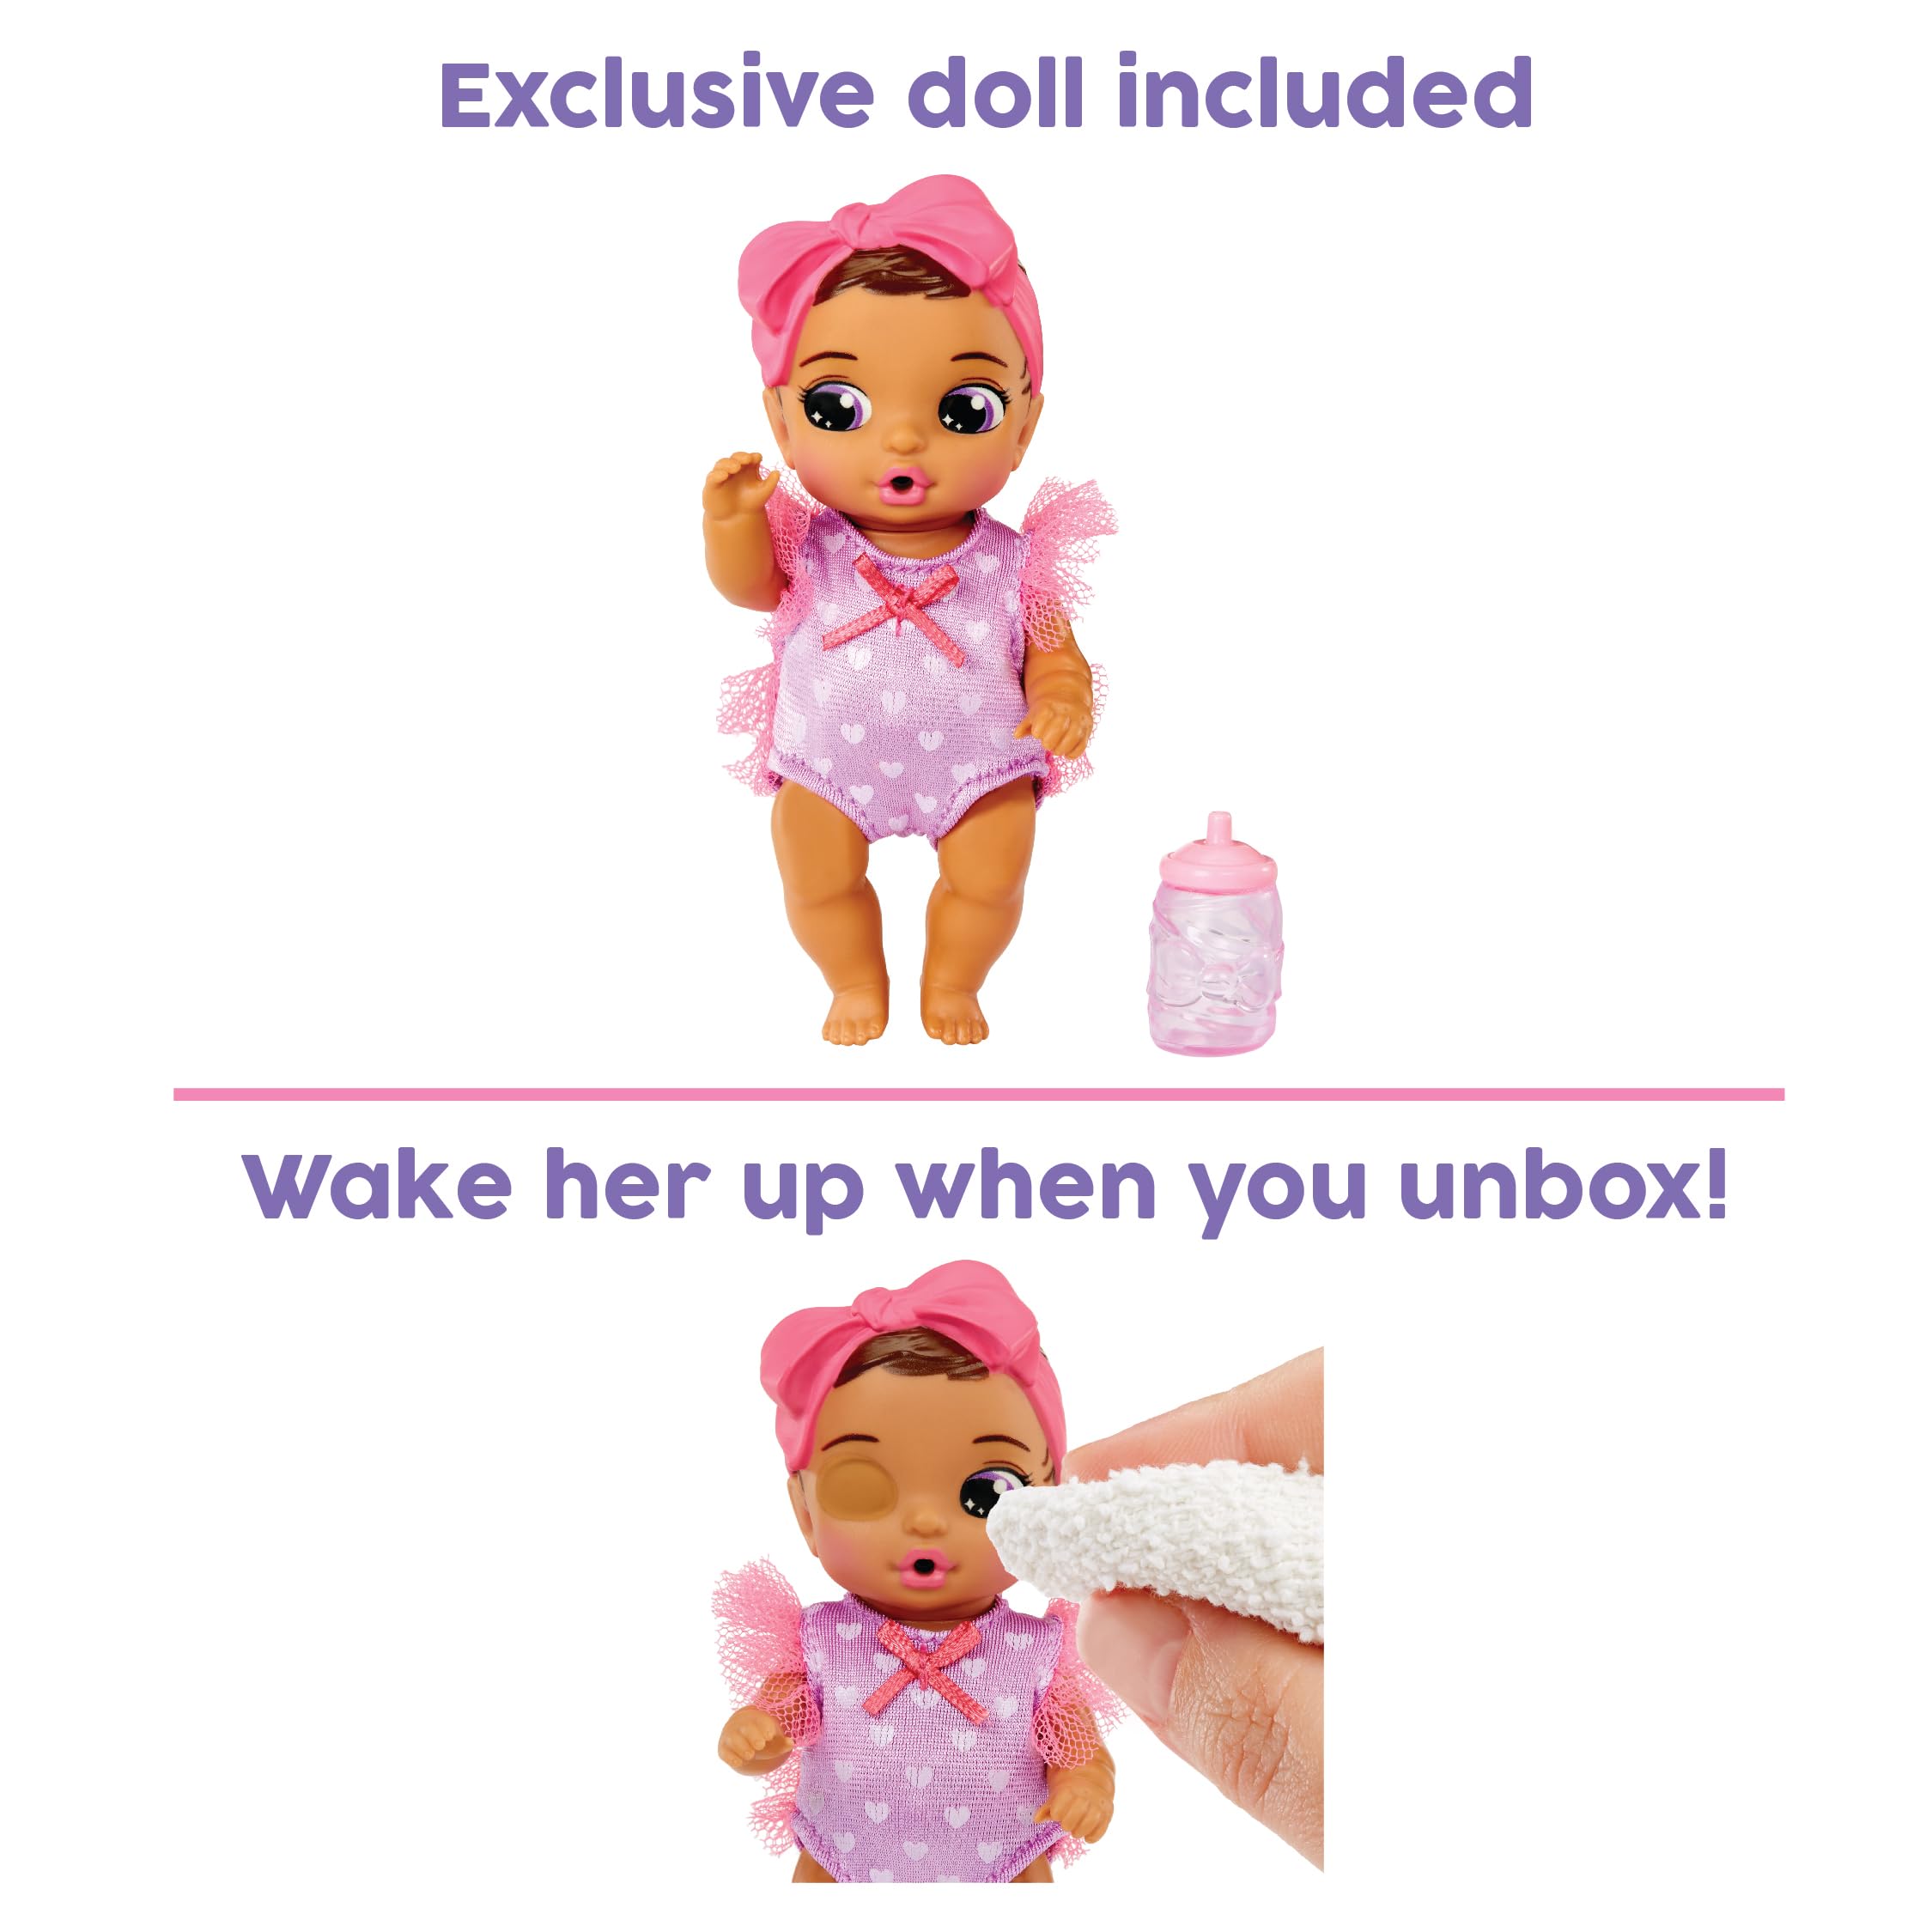 Baby Born Surprise Bottle House Playset with Exclusive Doll - Discover 20+ Surprises, 2 Levels of Play, 6 Rooms to Explore, for Kids Ages 3 and Up